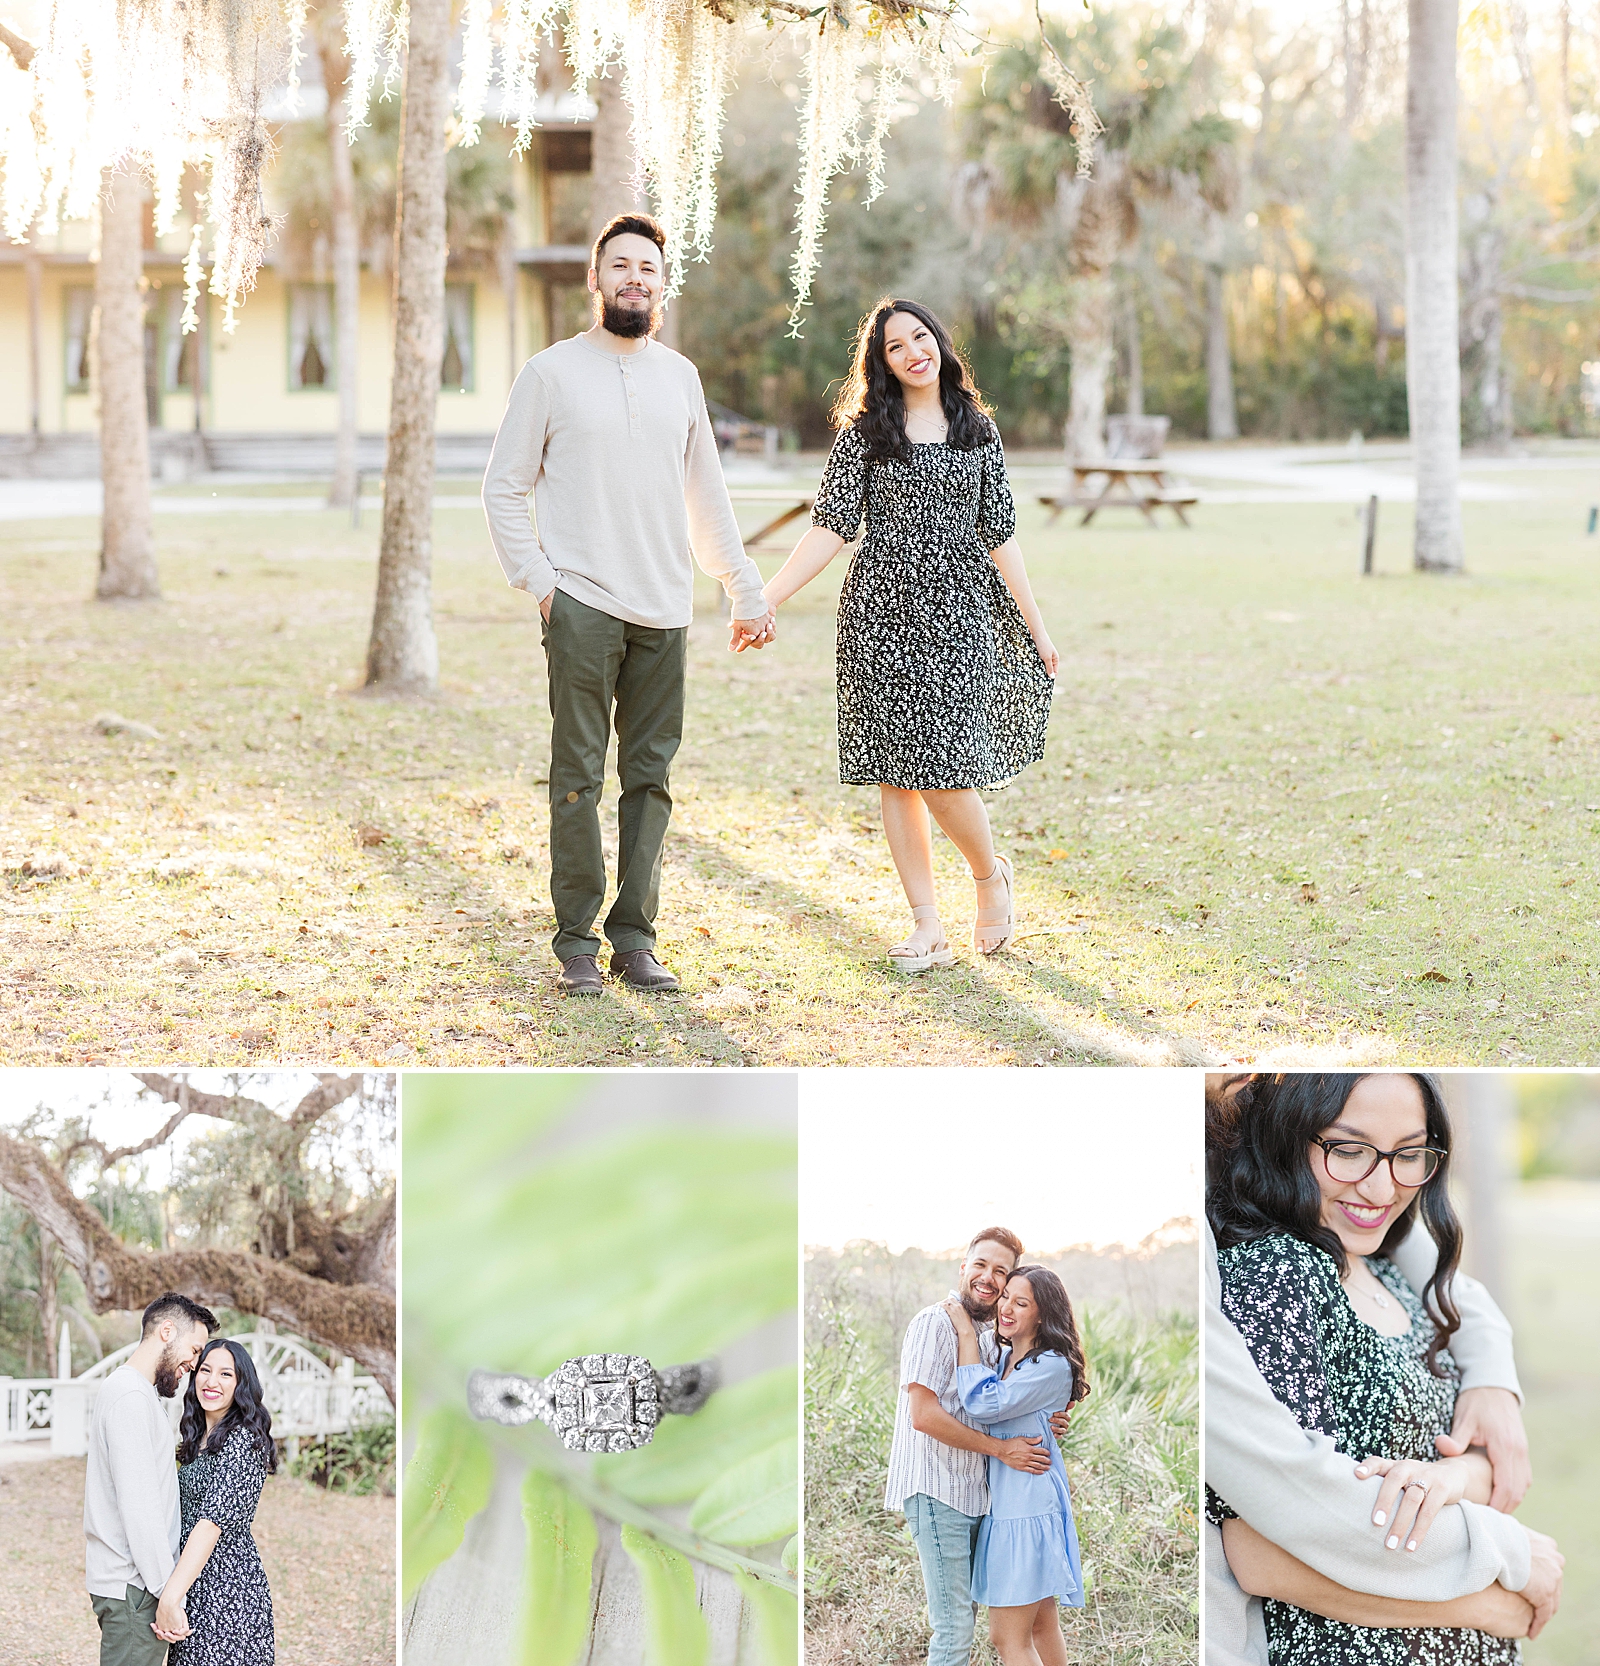 Engagement Pictures at Koreshan State Park in Estero, Florida